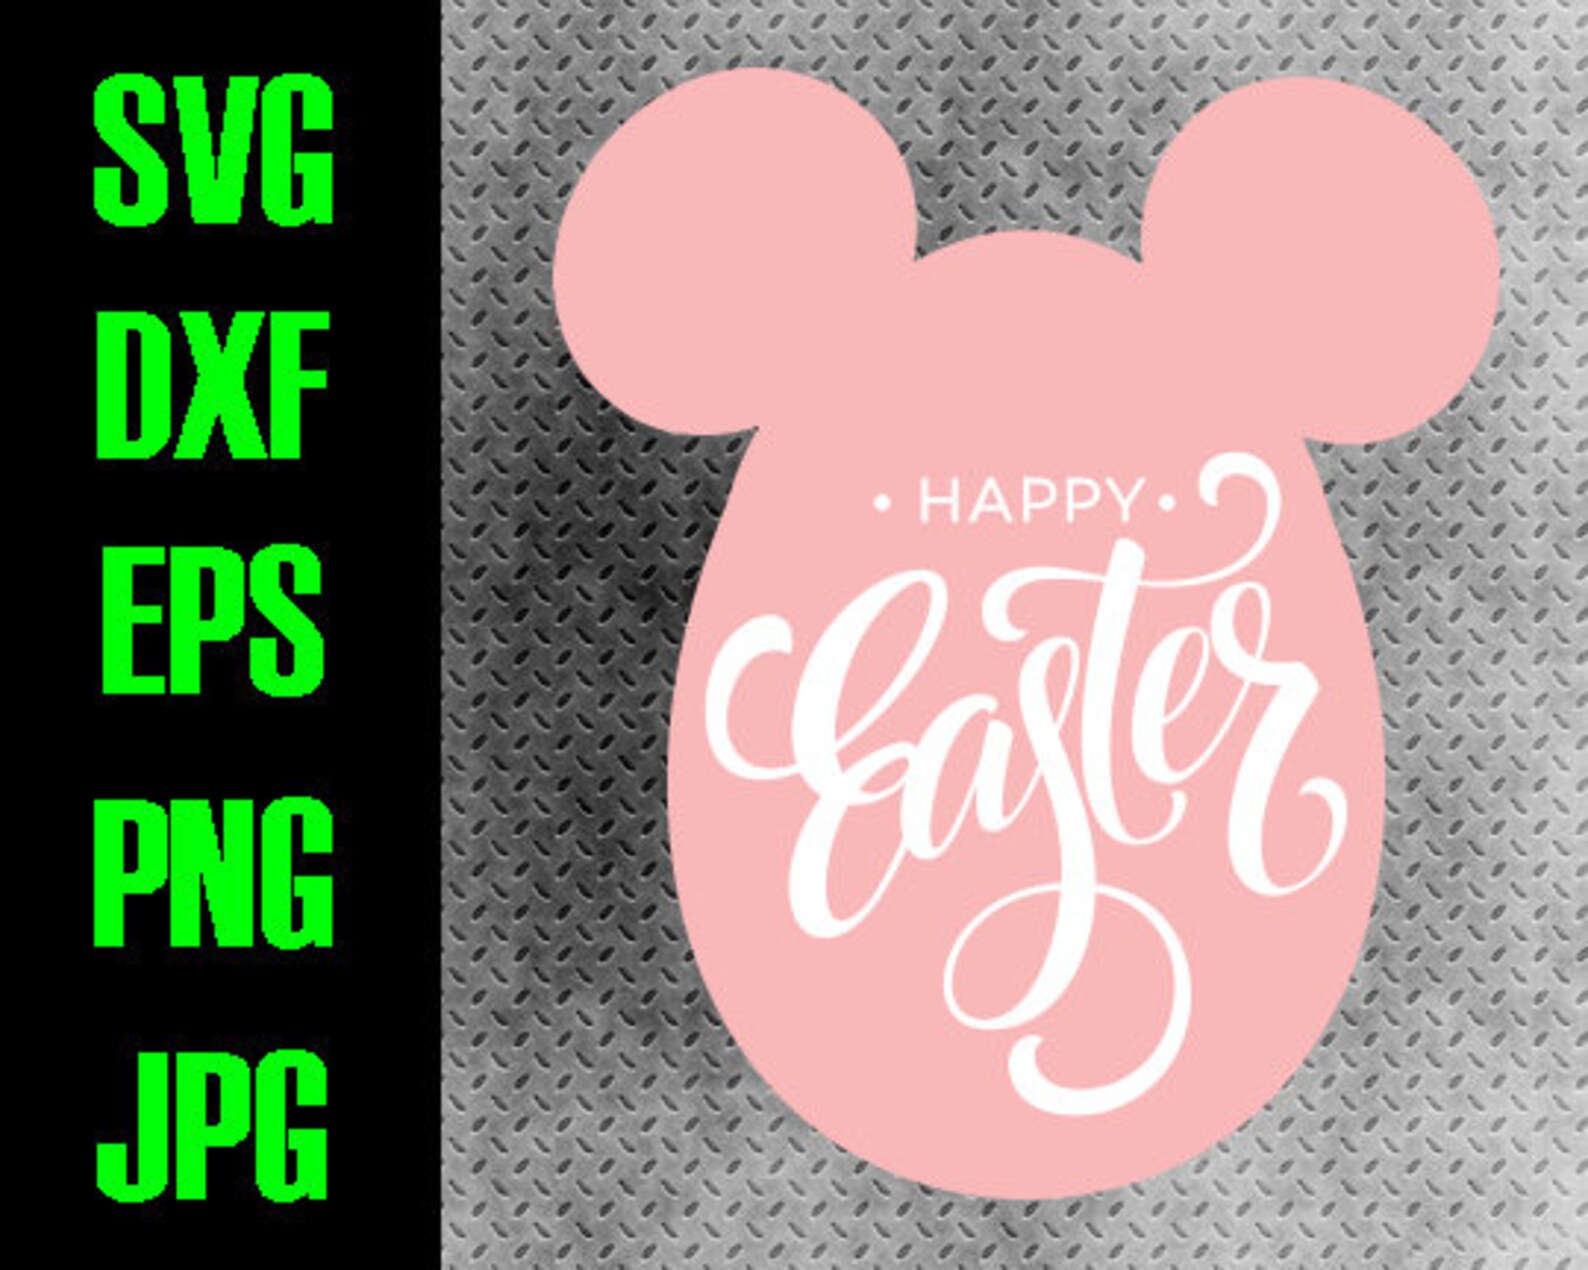 Disney Easter Svg Dxf Eps Png Jpg Cutting Files | Etsy